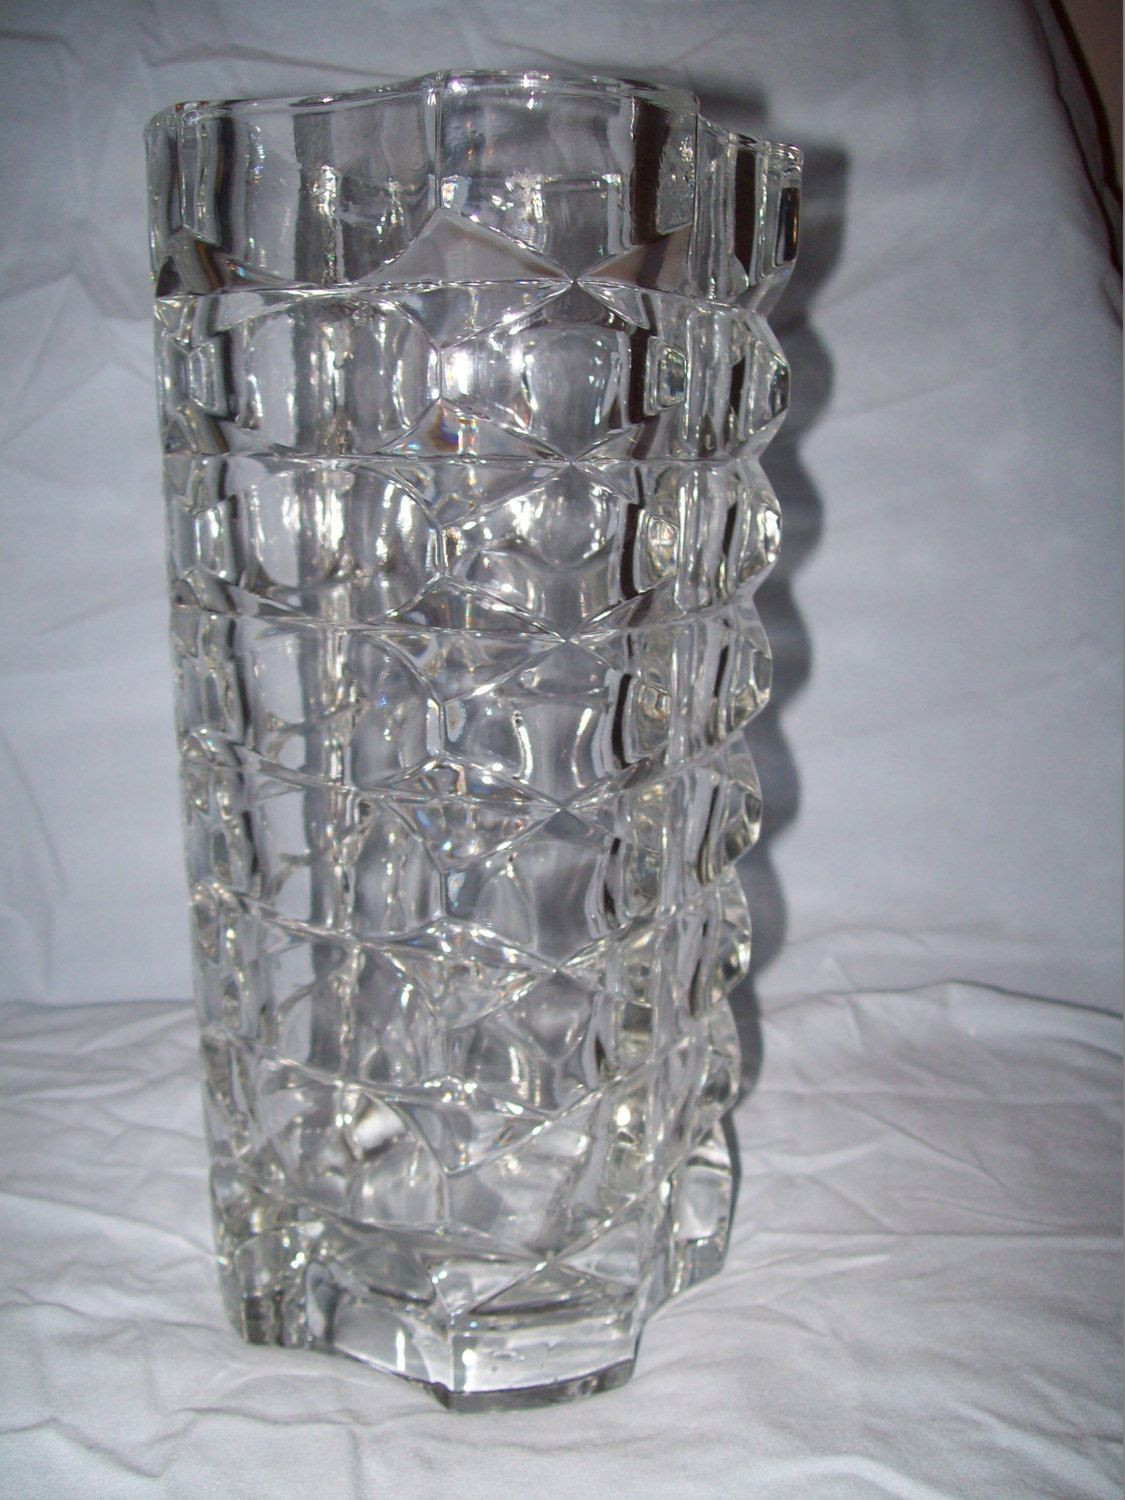 23 Unique Extra Large Crystal Vase 2024 free download extra large crystal vase of extra large glass vase gallery clear glass very old large vase pertaining to extra large glass vase gallery clear glass very old large vase leaded glass very heav